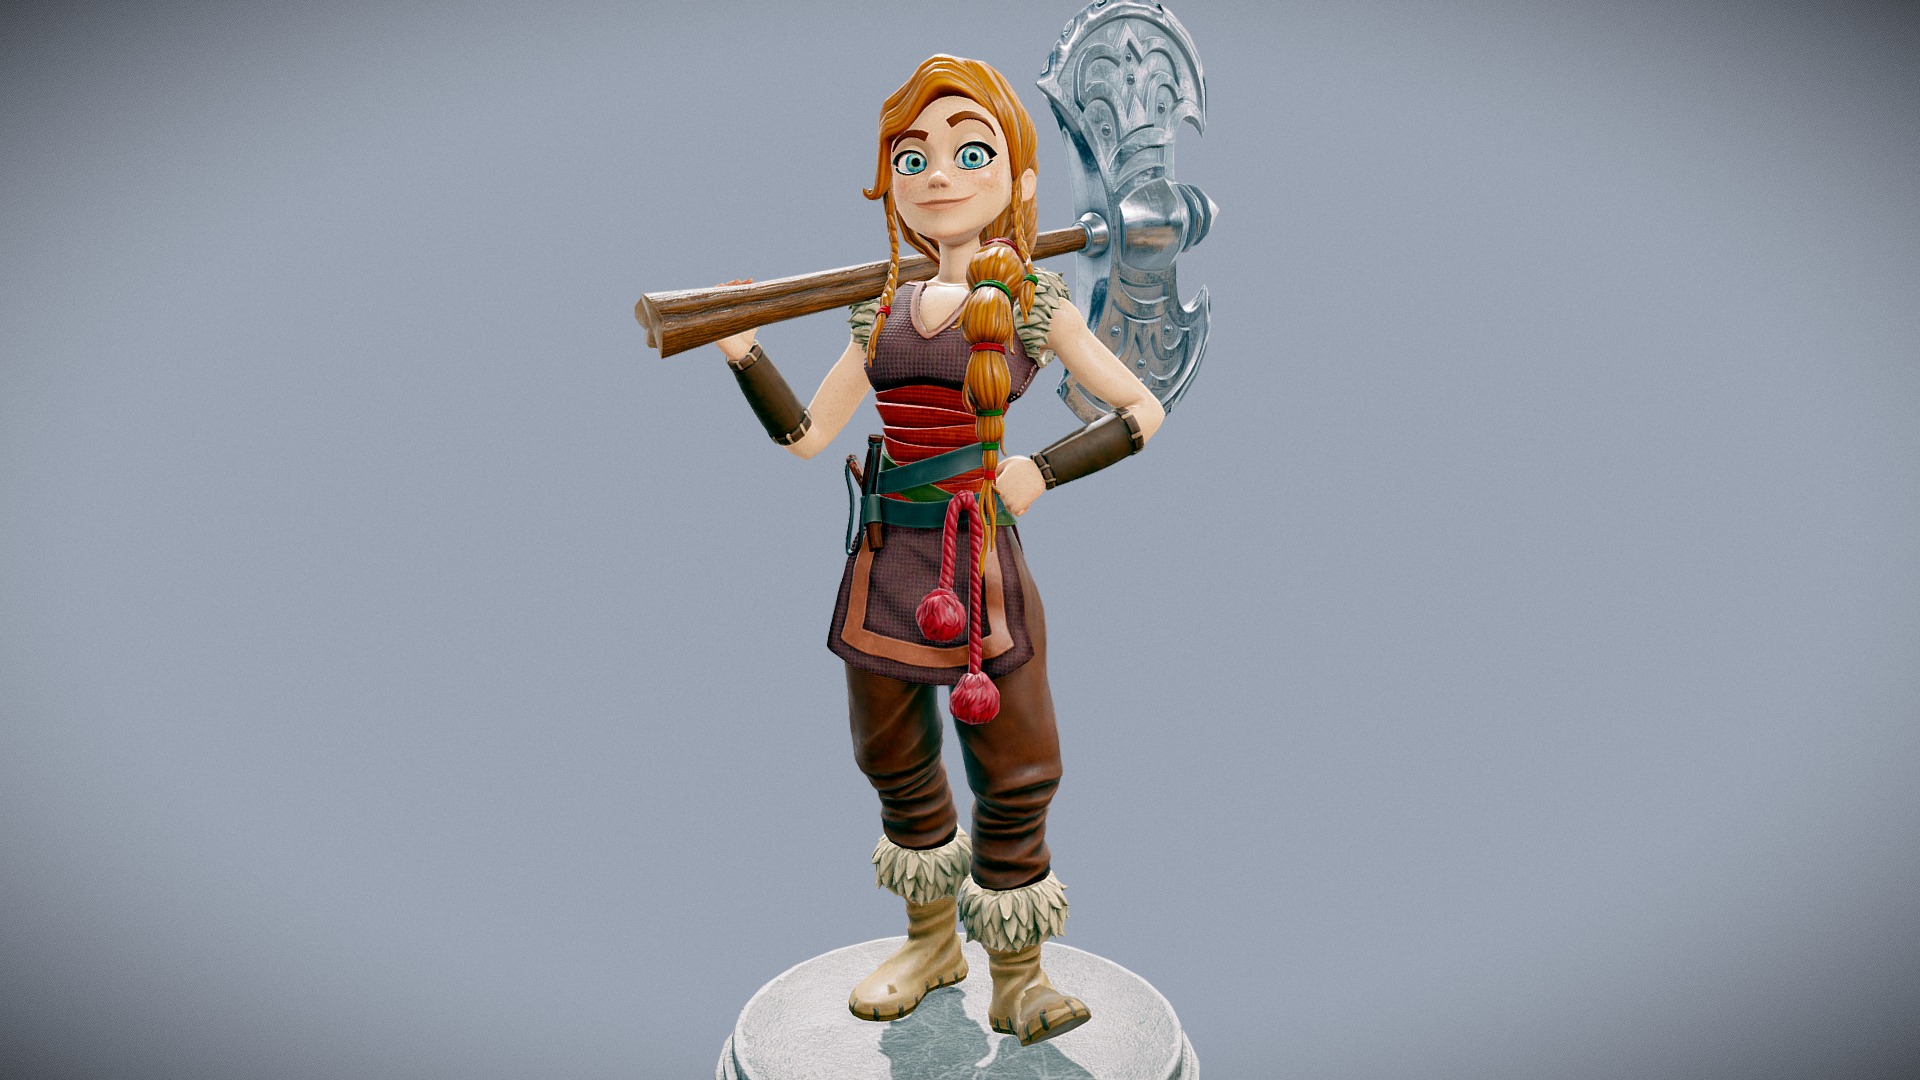 Here is my last personal project for videogame engine. I learned a lot with this lady and hope you like it! 
Based on Salena Barnes' concept - Viking Daughter - 3D model by MarcelPou 3d model